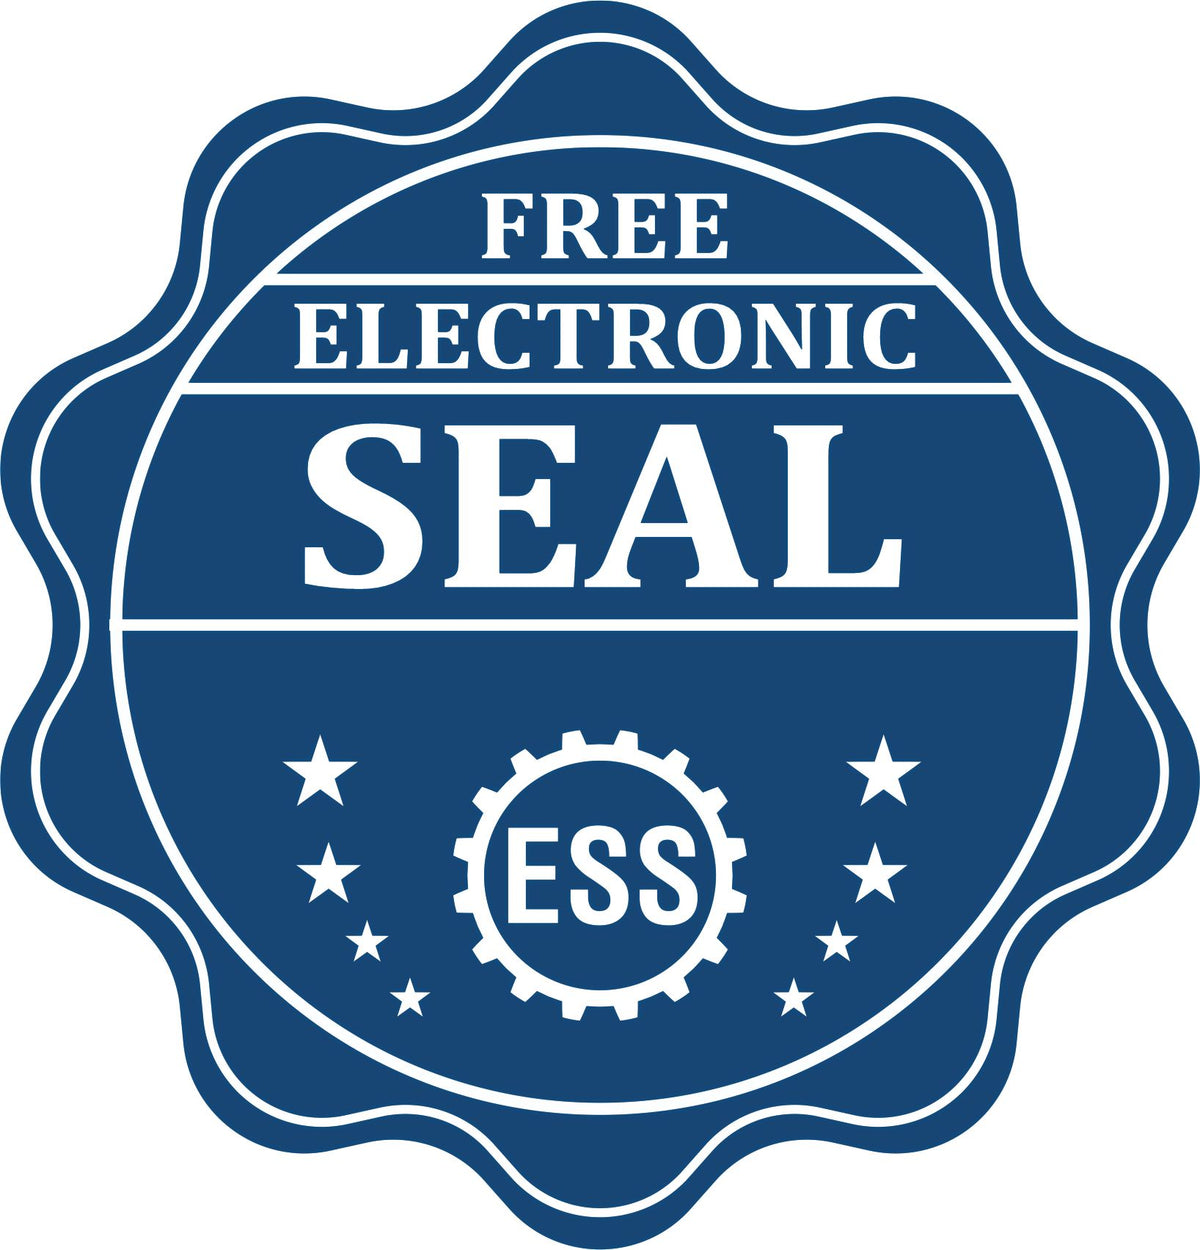 A badge showing a free electronic seal for the State of South Dakota Extended Long Reach Geologist Seal with stars and the ESS gear on the emblem.